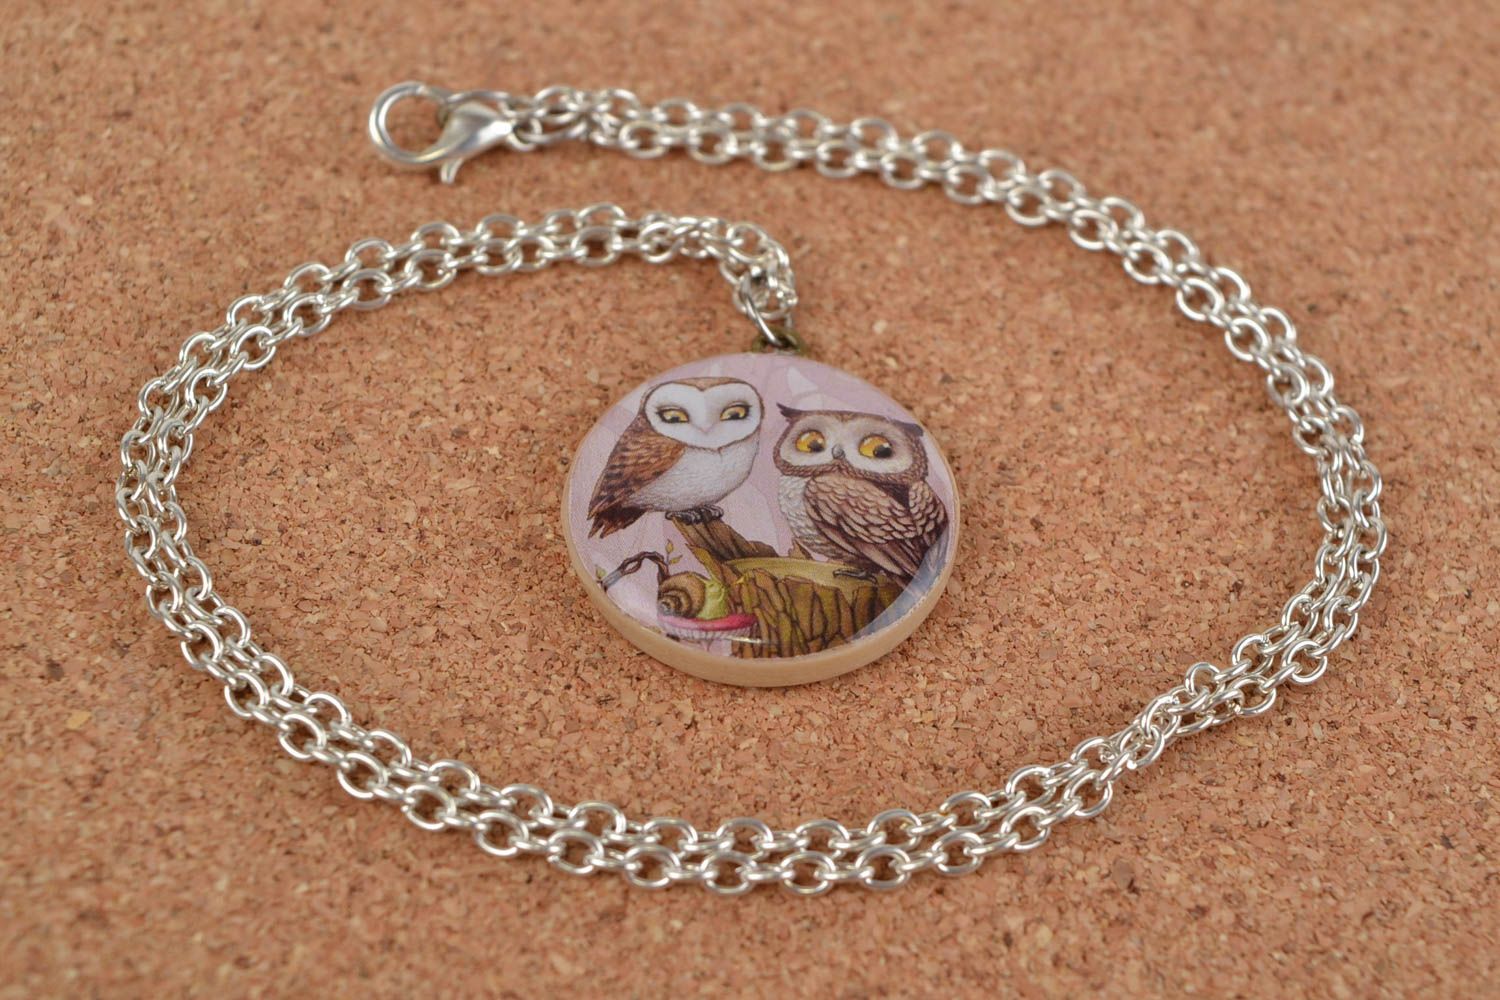 Handmade round decoupage polymer clay designer pendant with owls image on chain photo 1